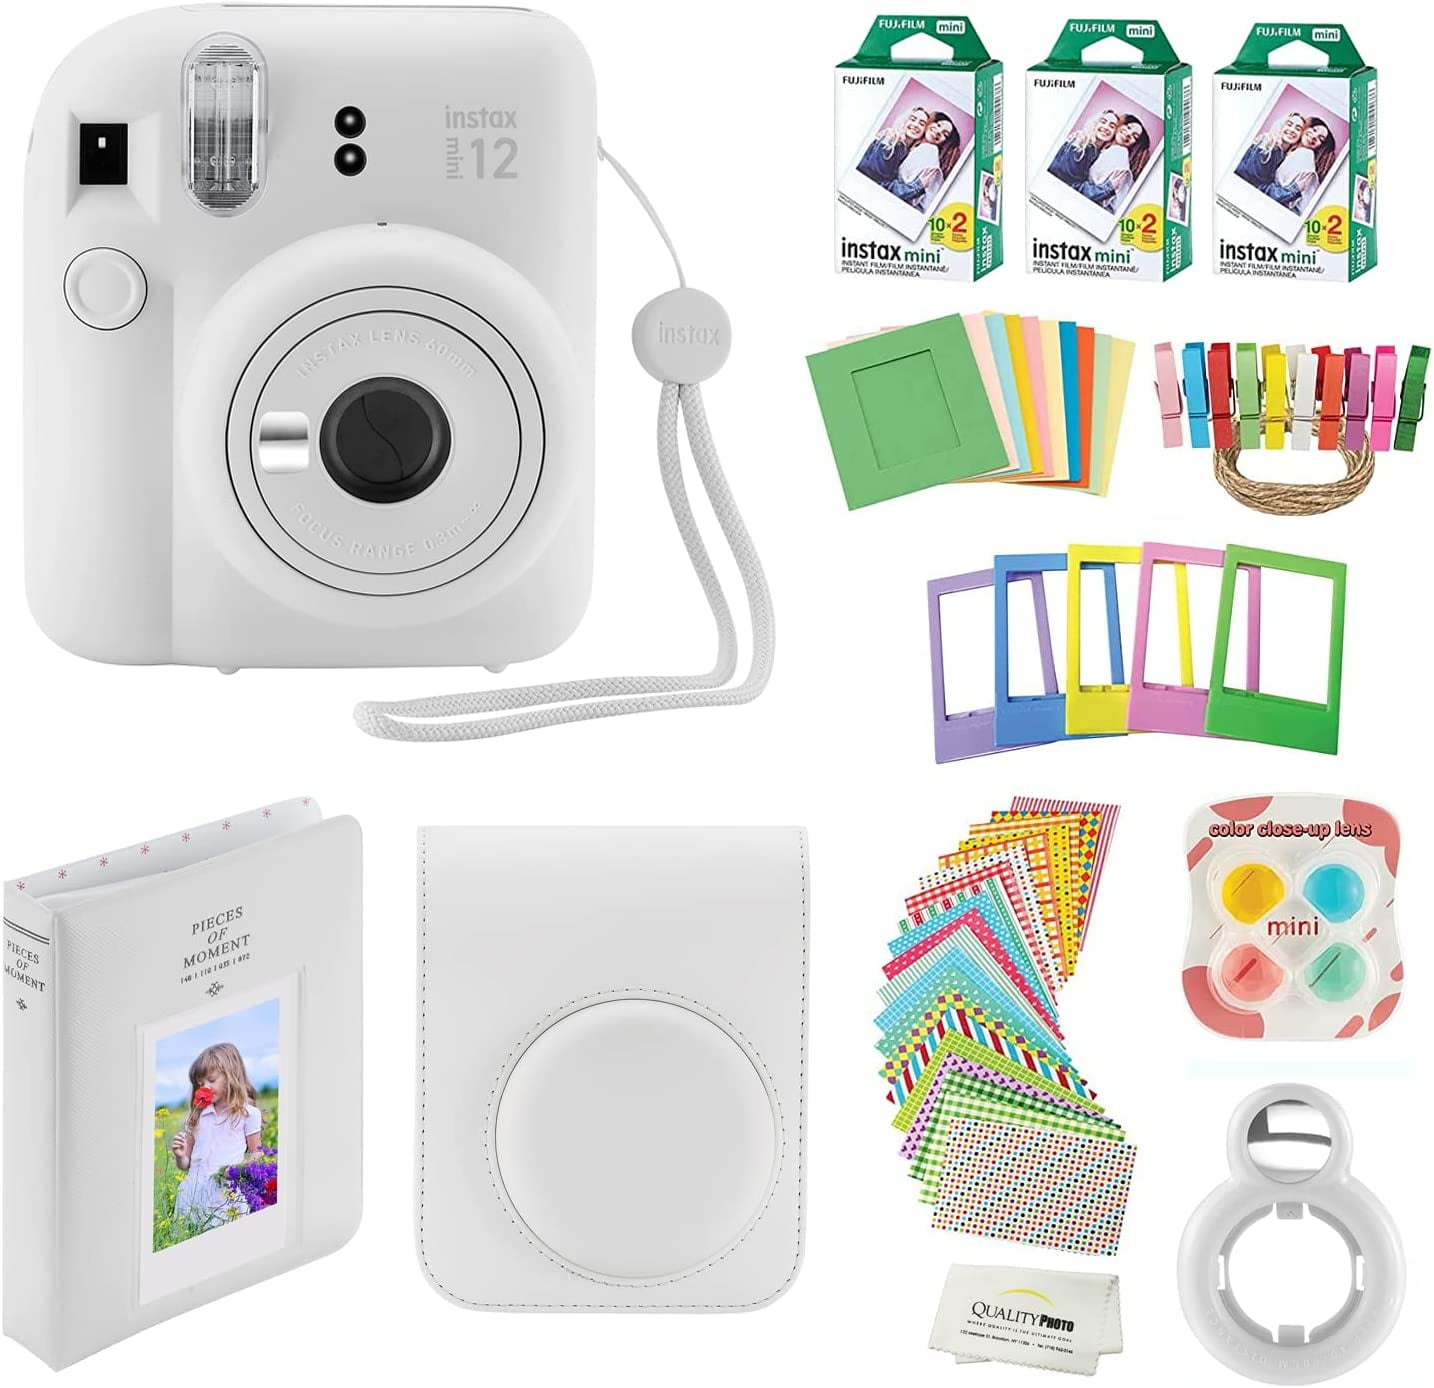 Fujifilm Instax Mini 12 Instant Camera with Case, 60 Fuji Films, Decoration  Stickers, Frames, Photo Album and More Accessory kit (Blush Pink) 